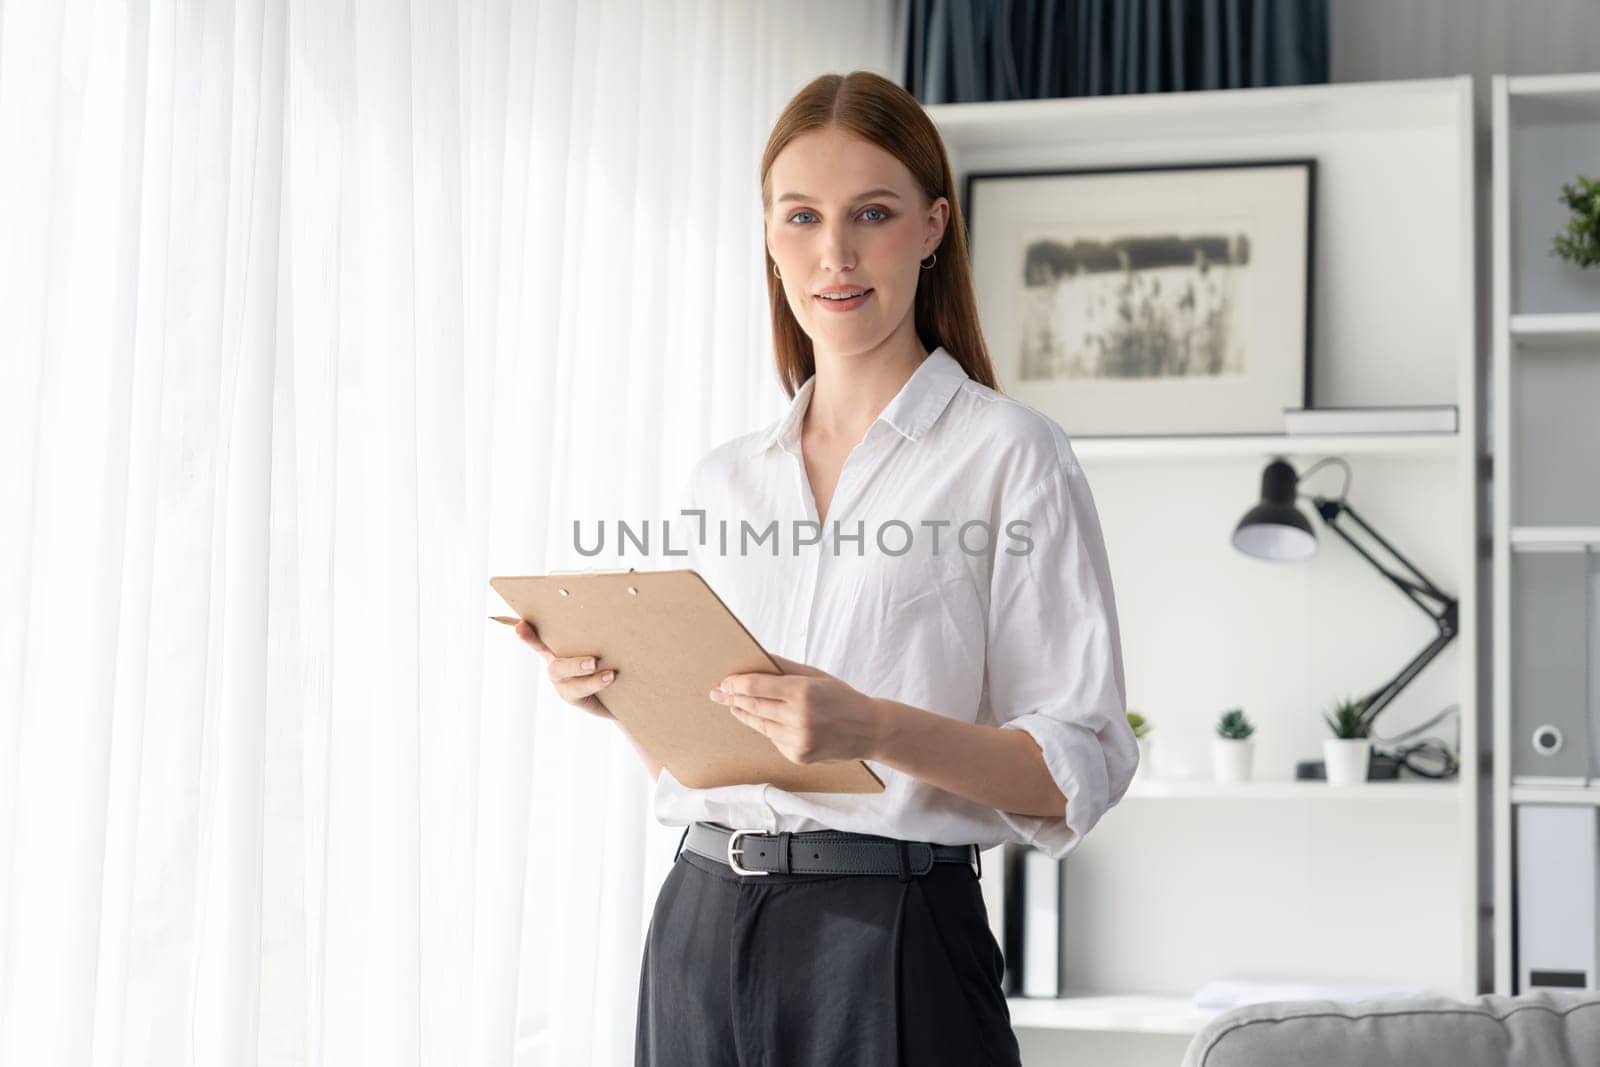 Psychologist woman in clinic office professional portrait utmost specialist by biancoblue